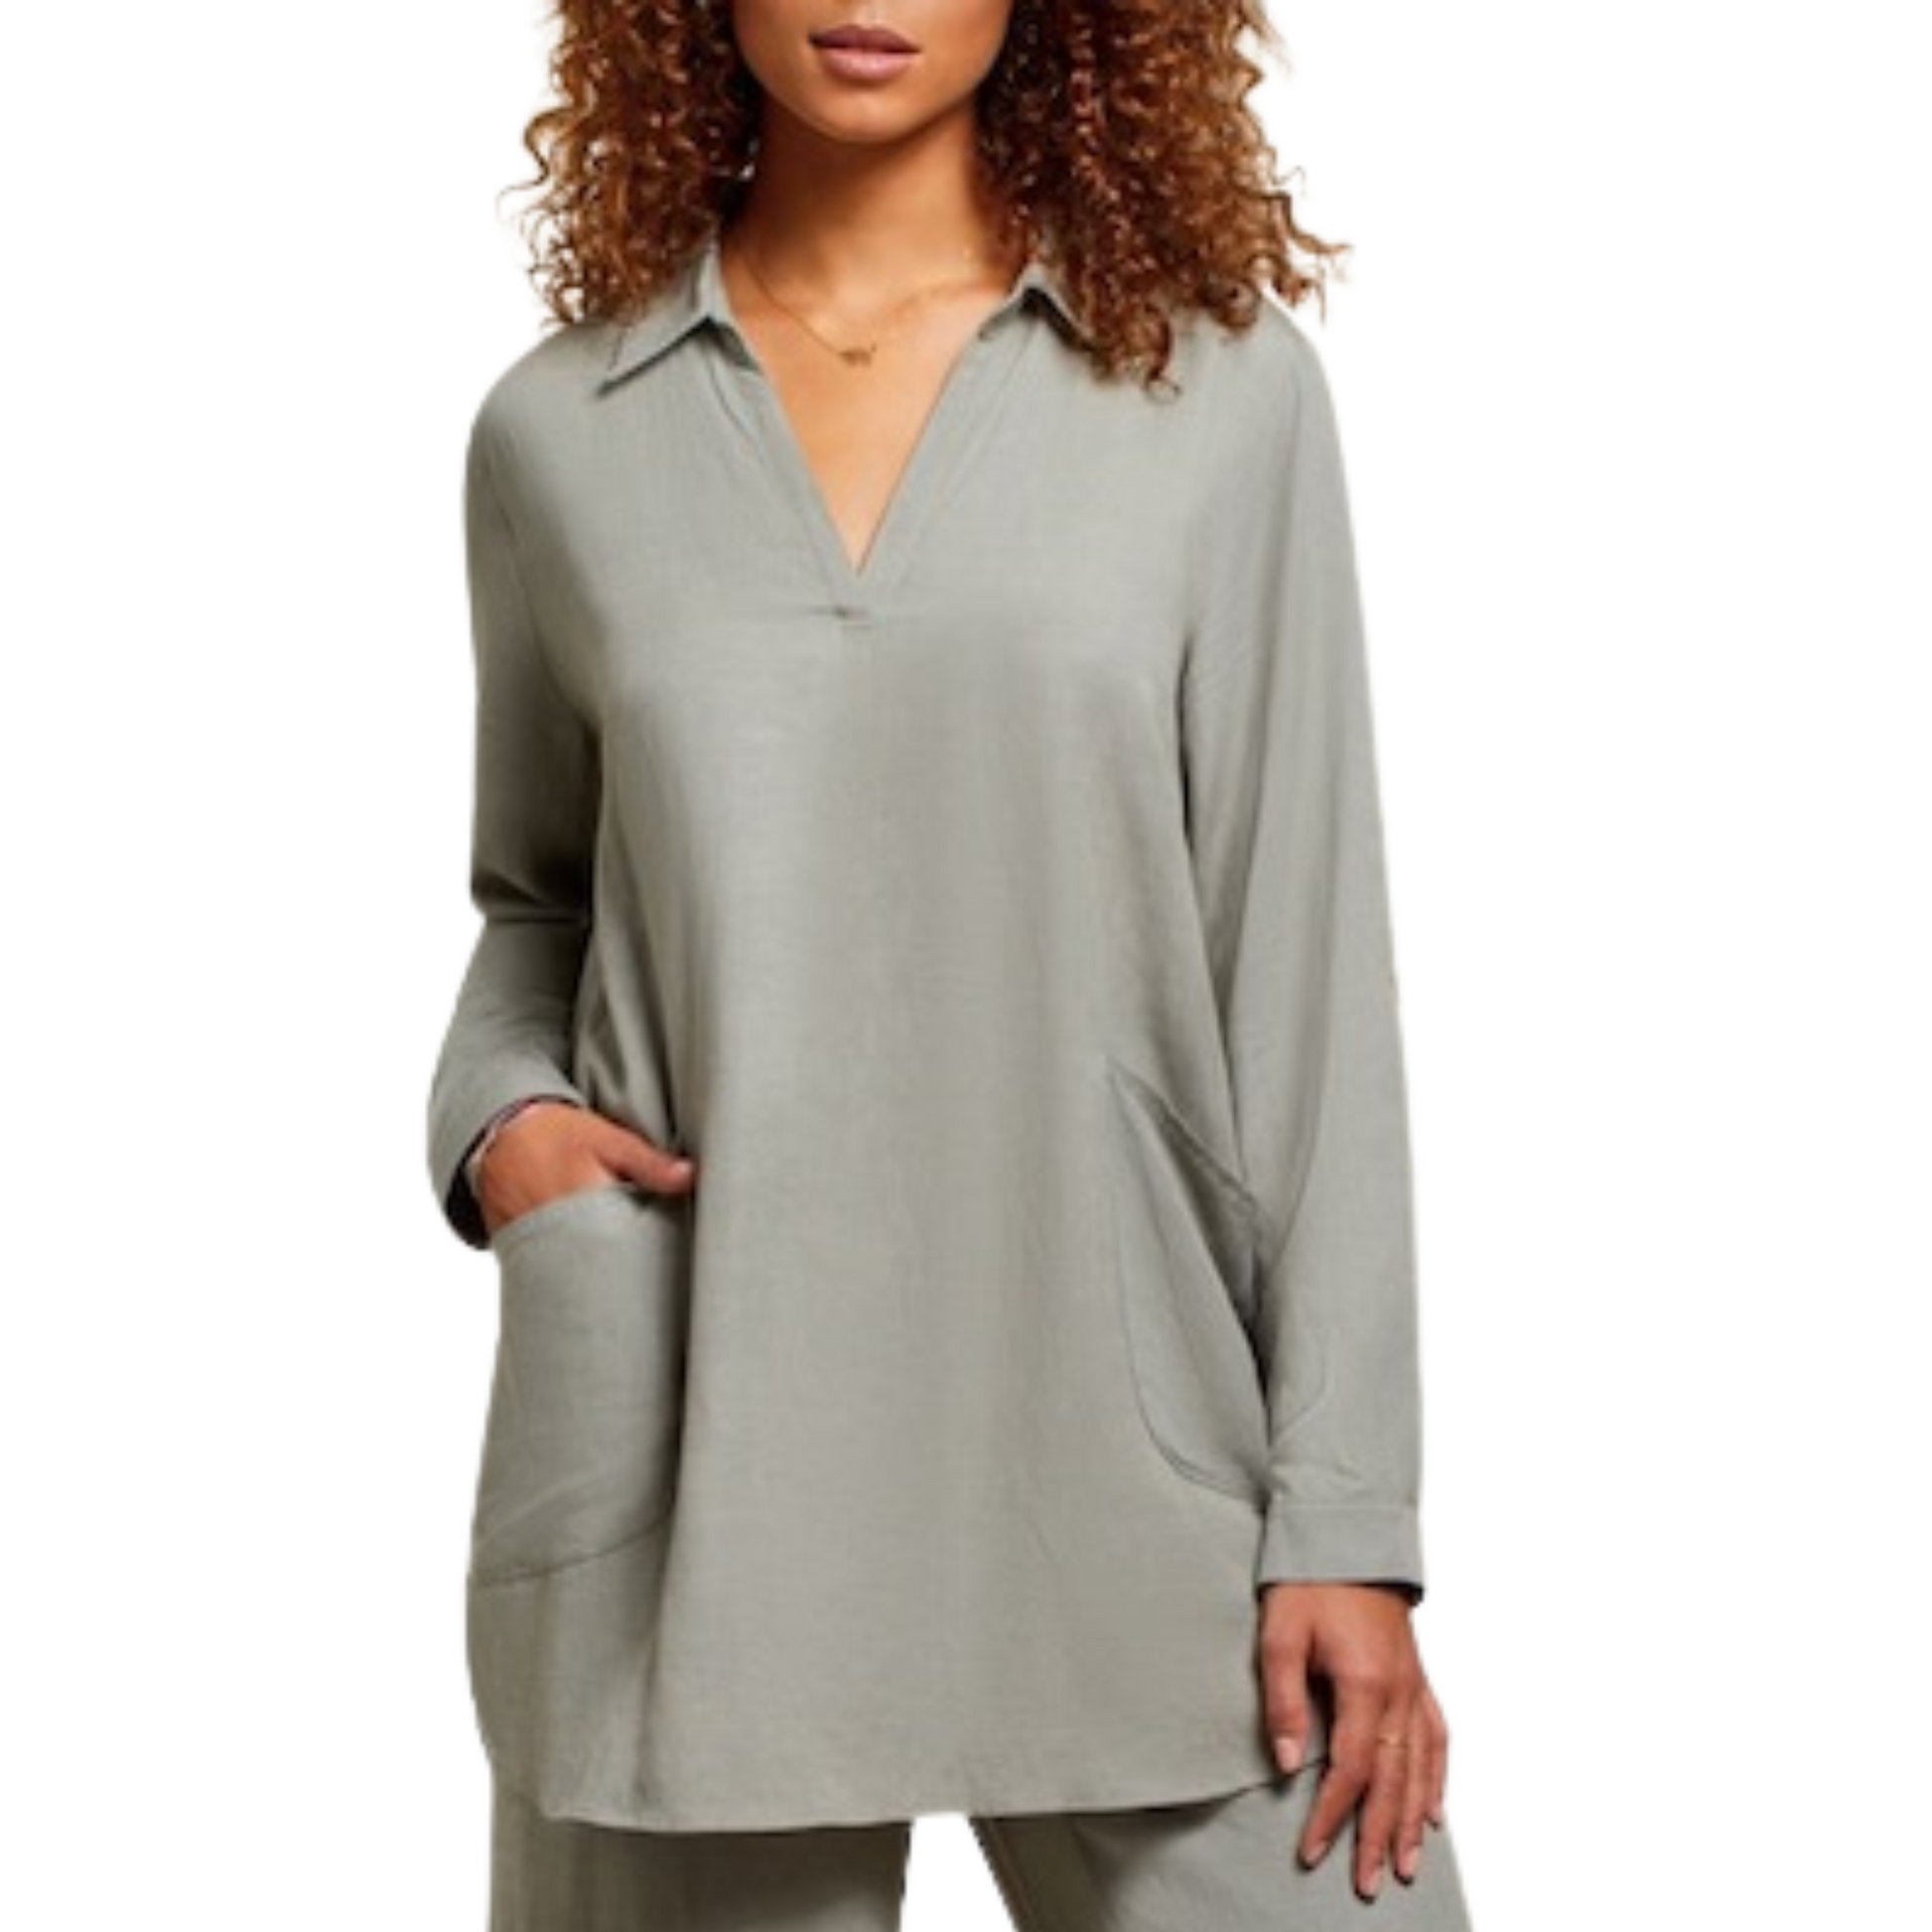 Collared tunic blouse in bay leaf